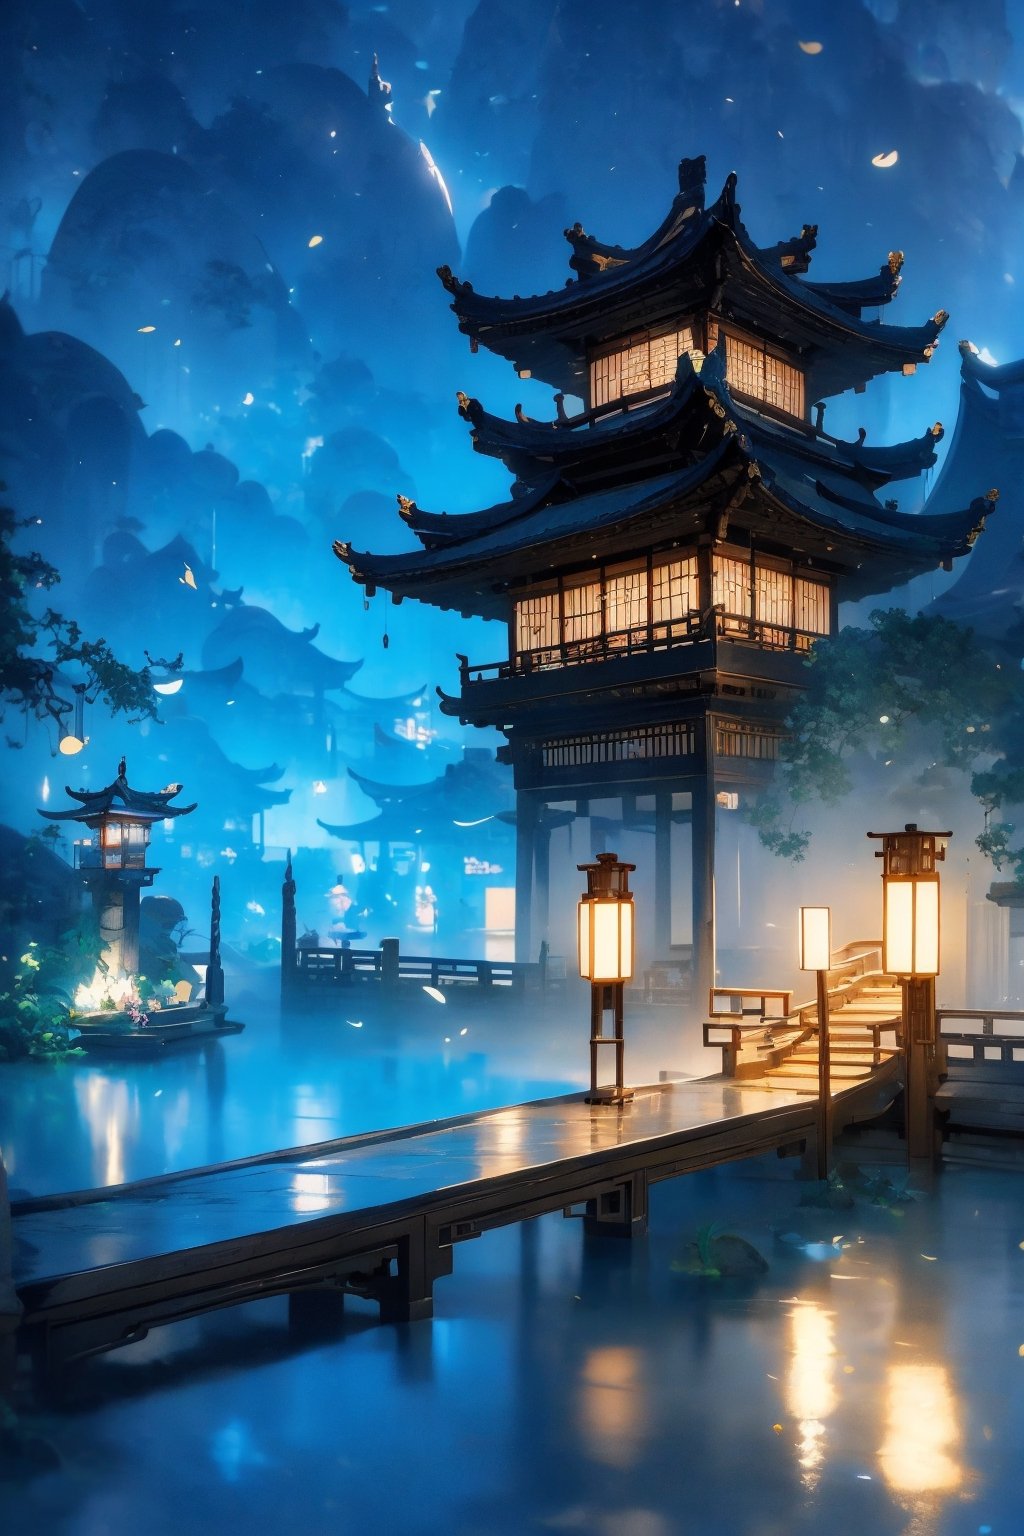 outdoors, sky, cloud, water, tree, no humans, building, scenery, reflection, lantern, stairs, architecture, east asian architecture,Chinese Architecture,blue moon, blue lotus pond,Surreal composition,Buildings scattered high and low,looking down from the sky, looking down, overlooking perspective